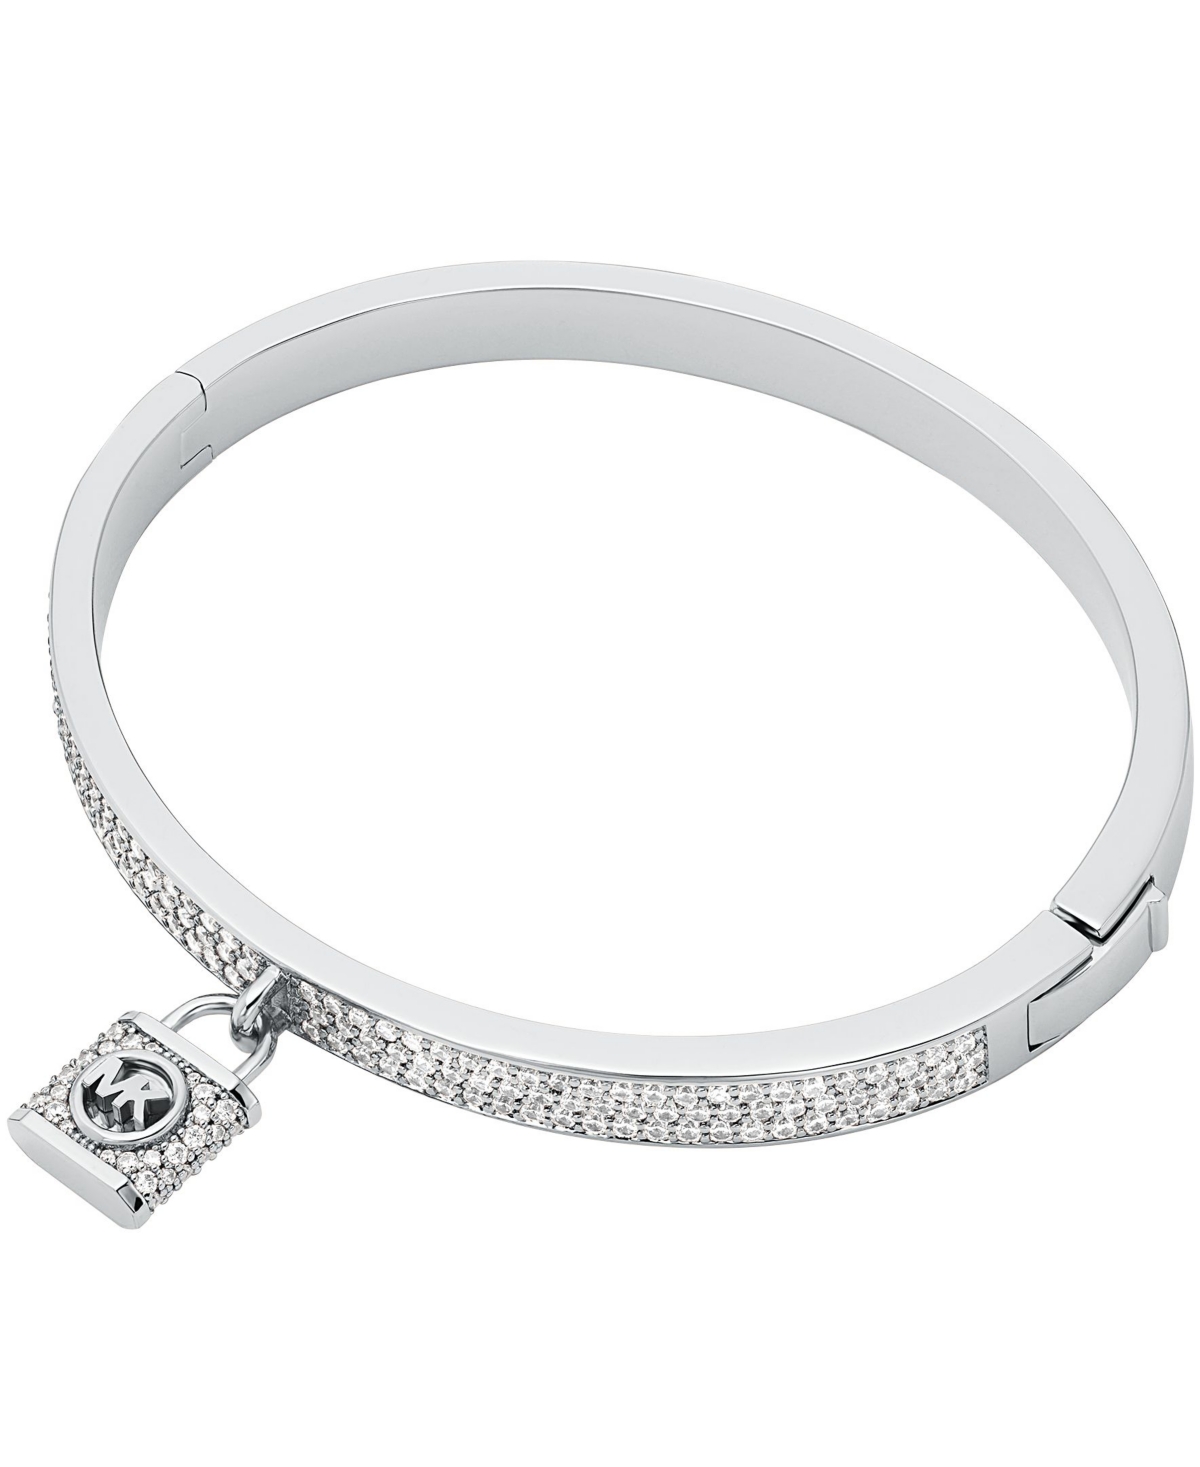 Michael Kors Pave Lock Charm Bangle In Silver